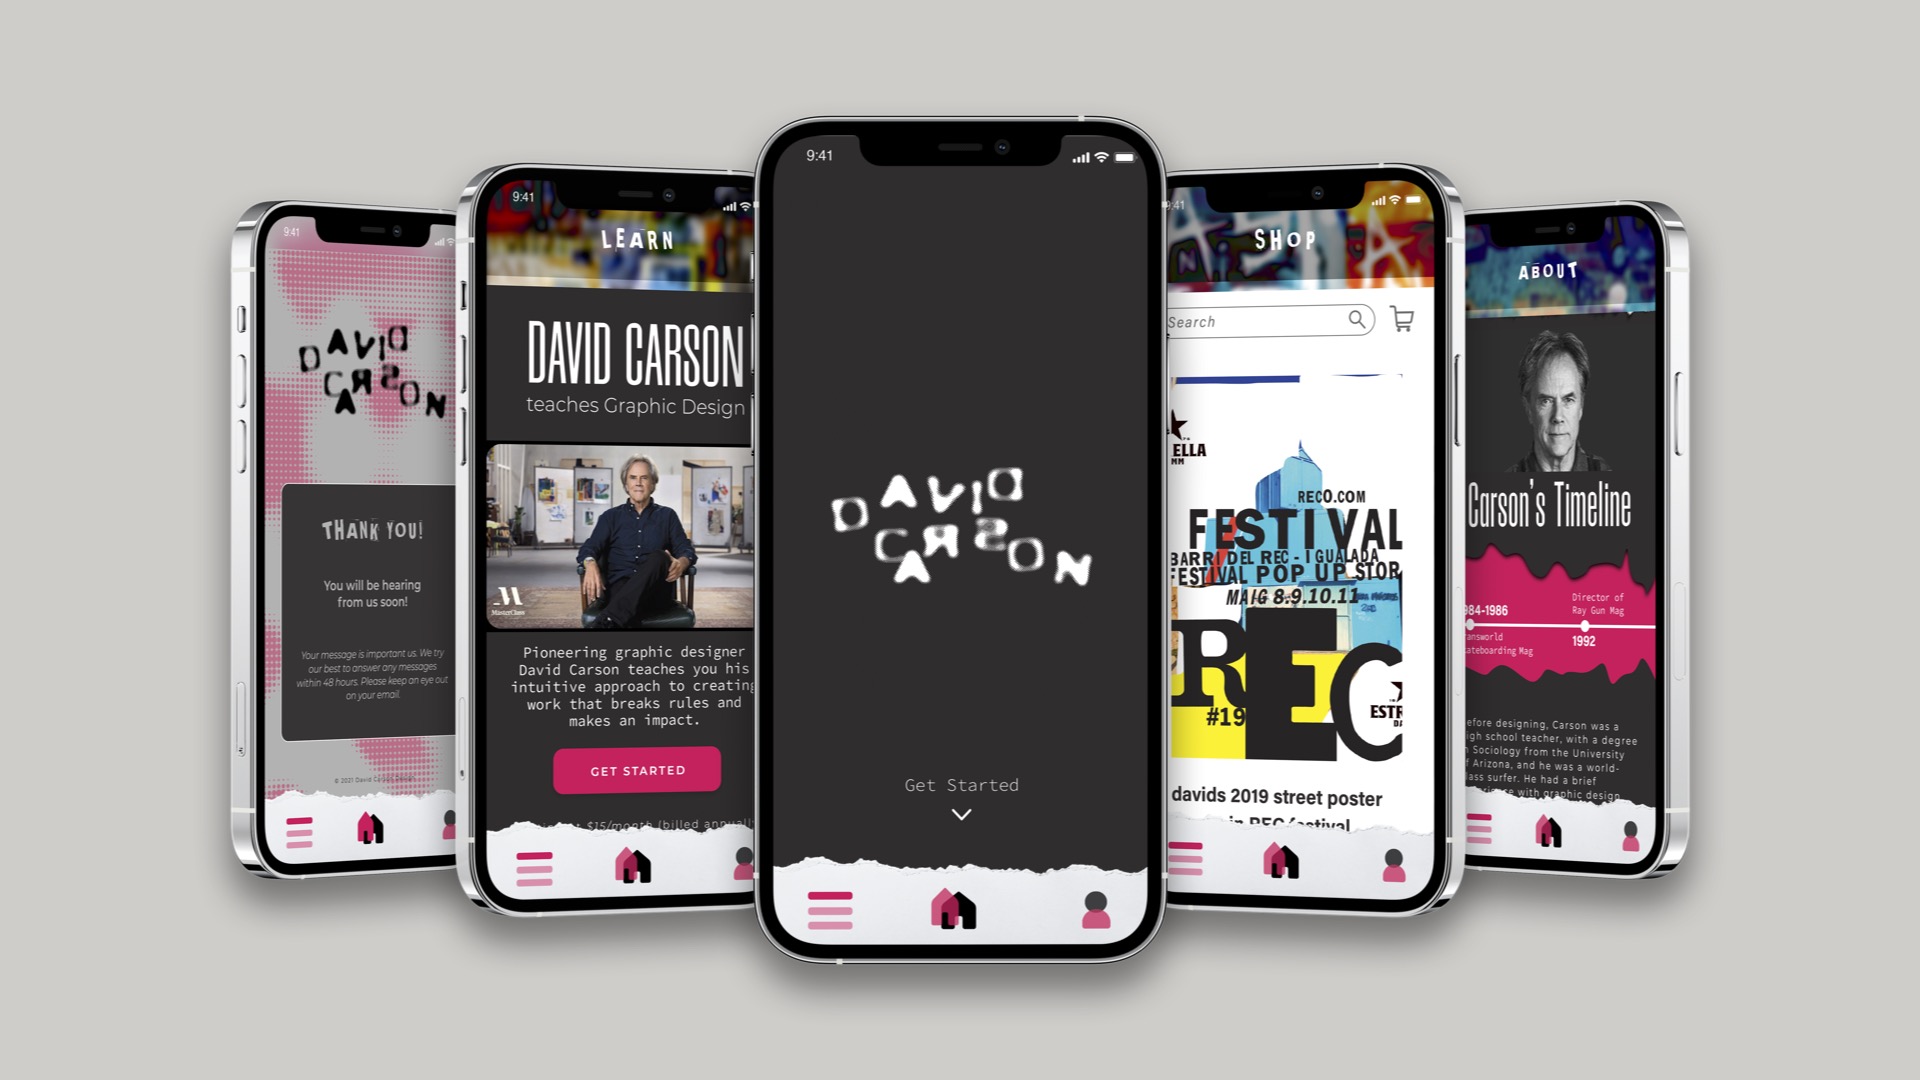  / “David Carson App Prototype” portfolio app prototype, digital devices, 2022. This is a functioning prototype to show the potential of this app design to the customer. 